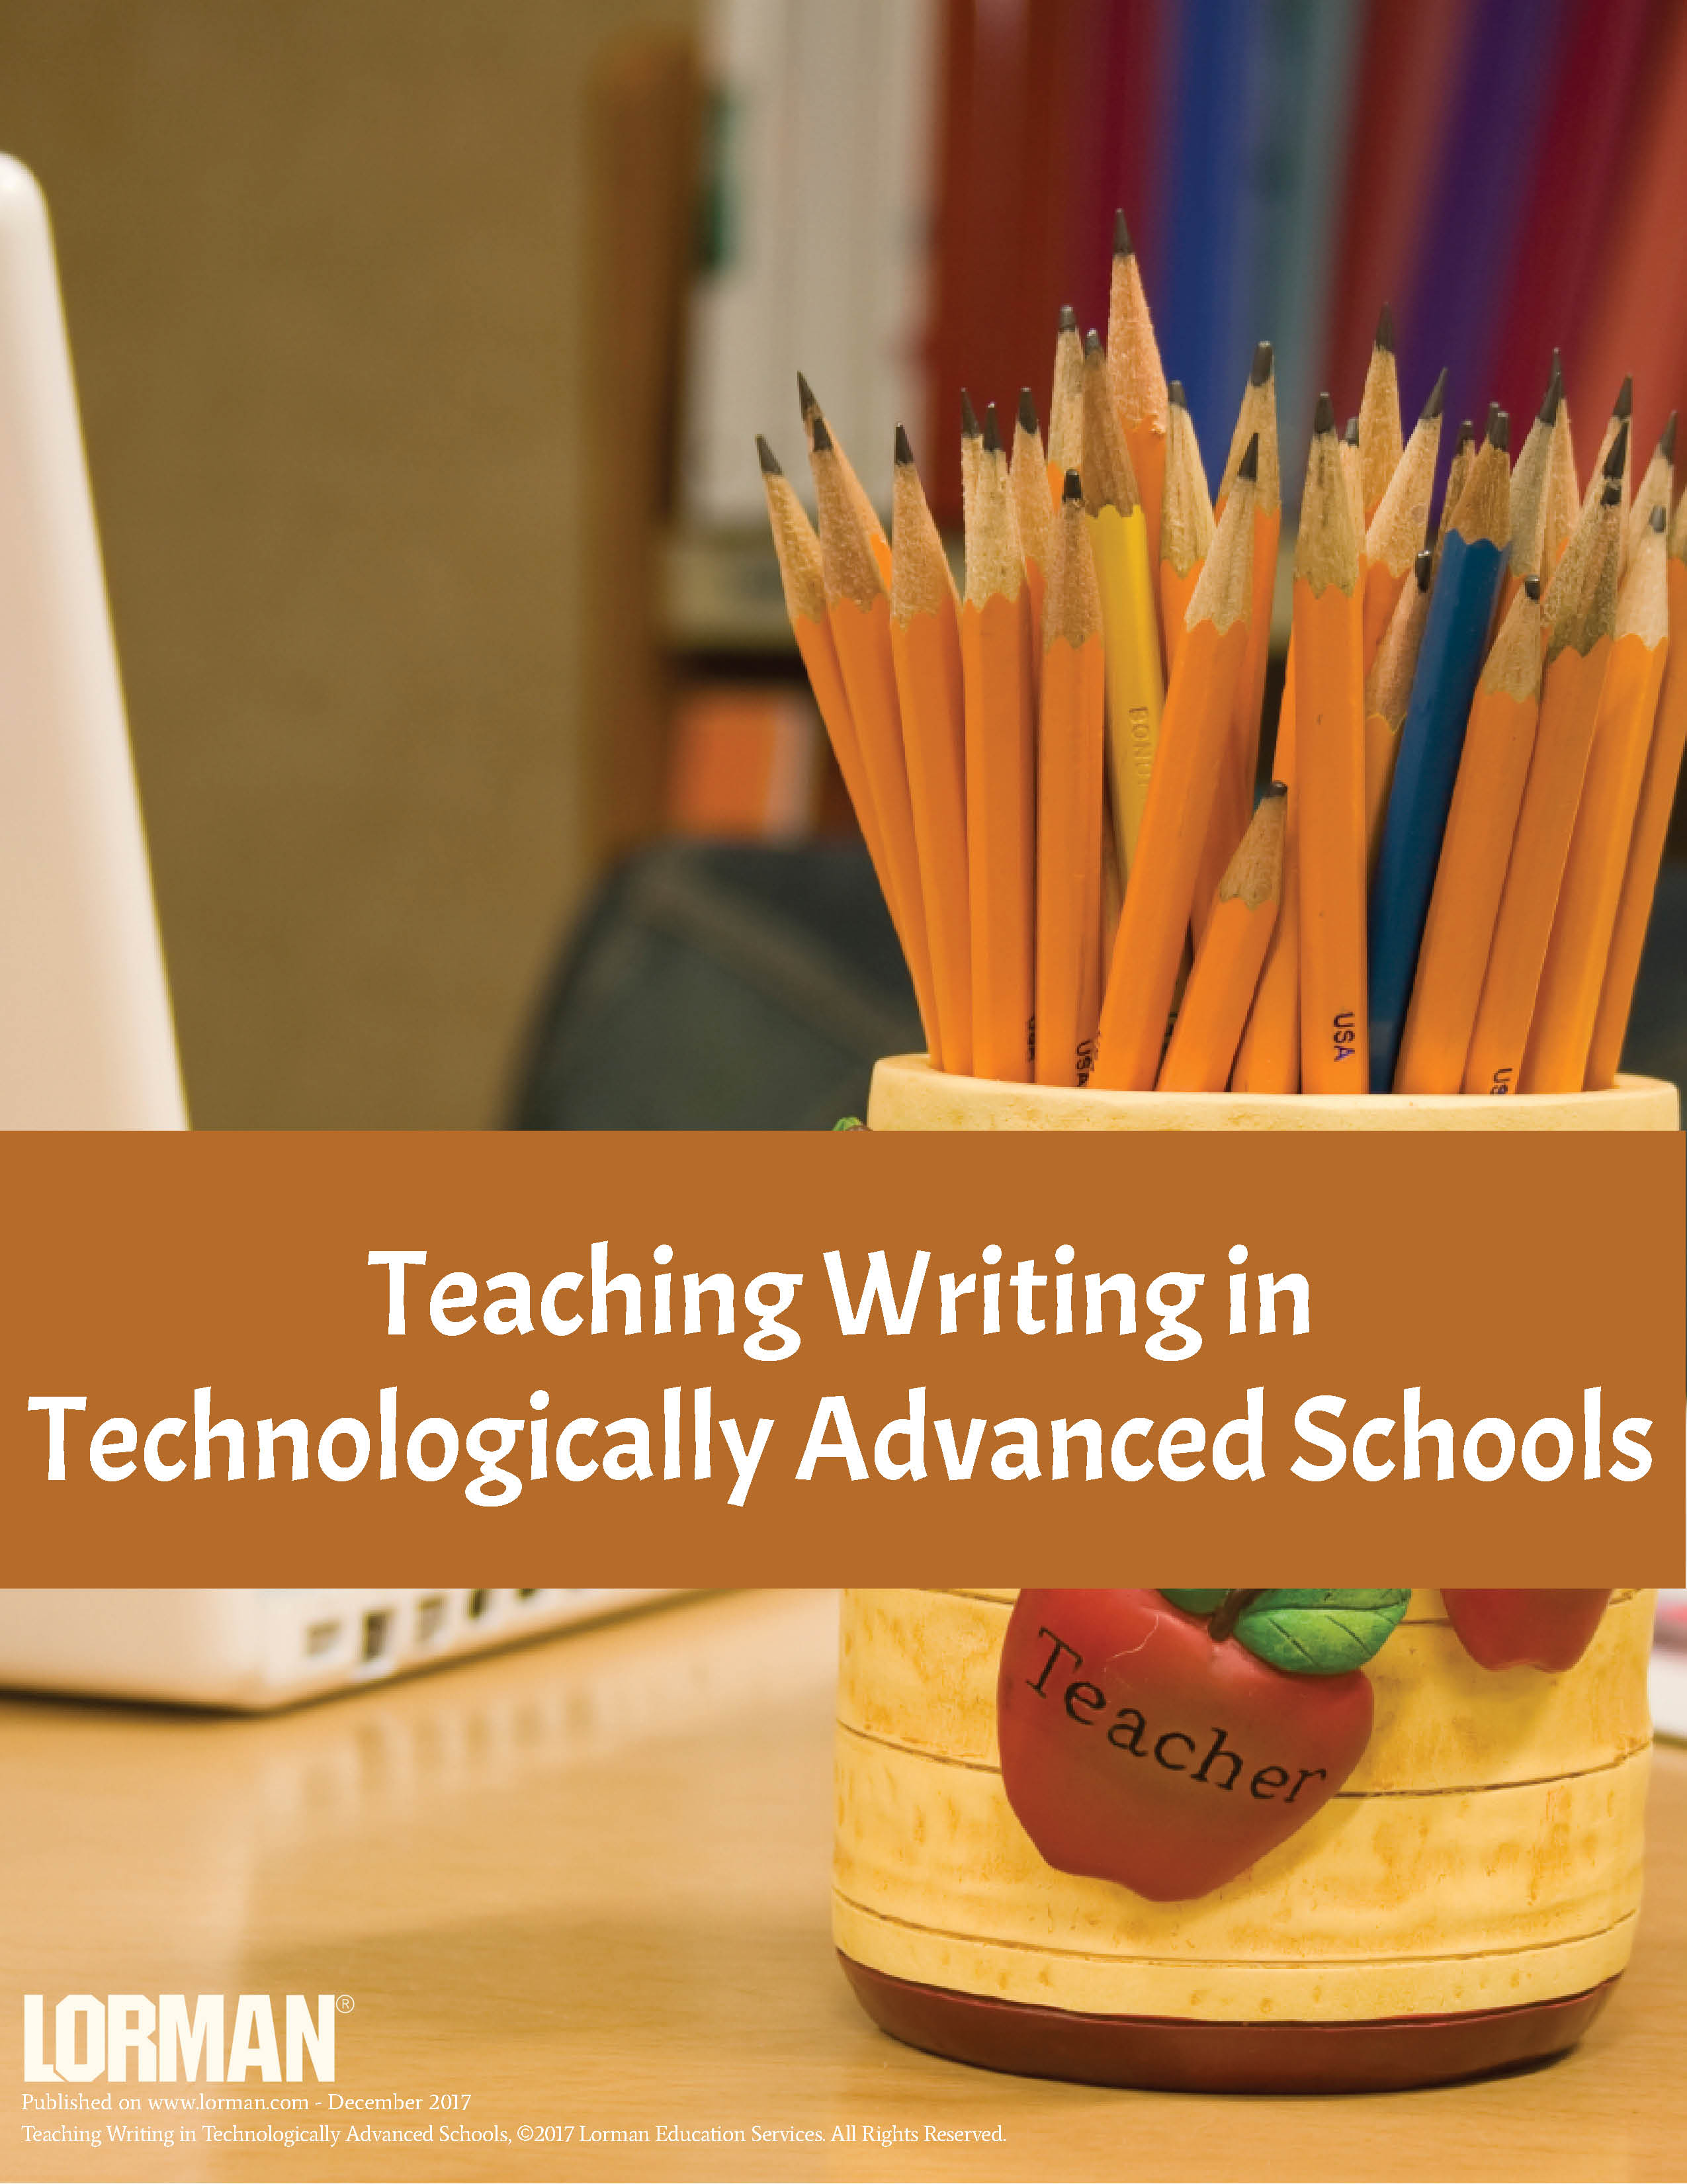 Teaching Writing in Technologically Advanced Schools